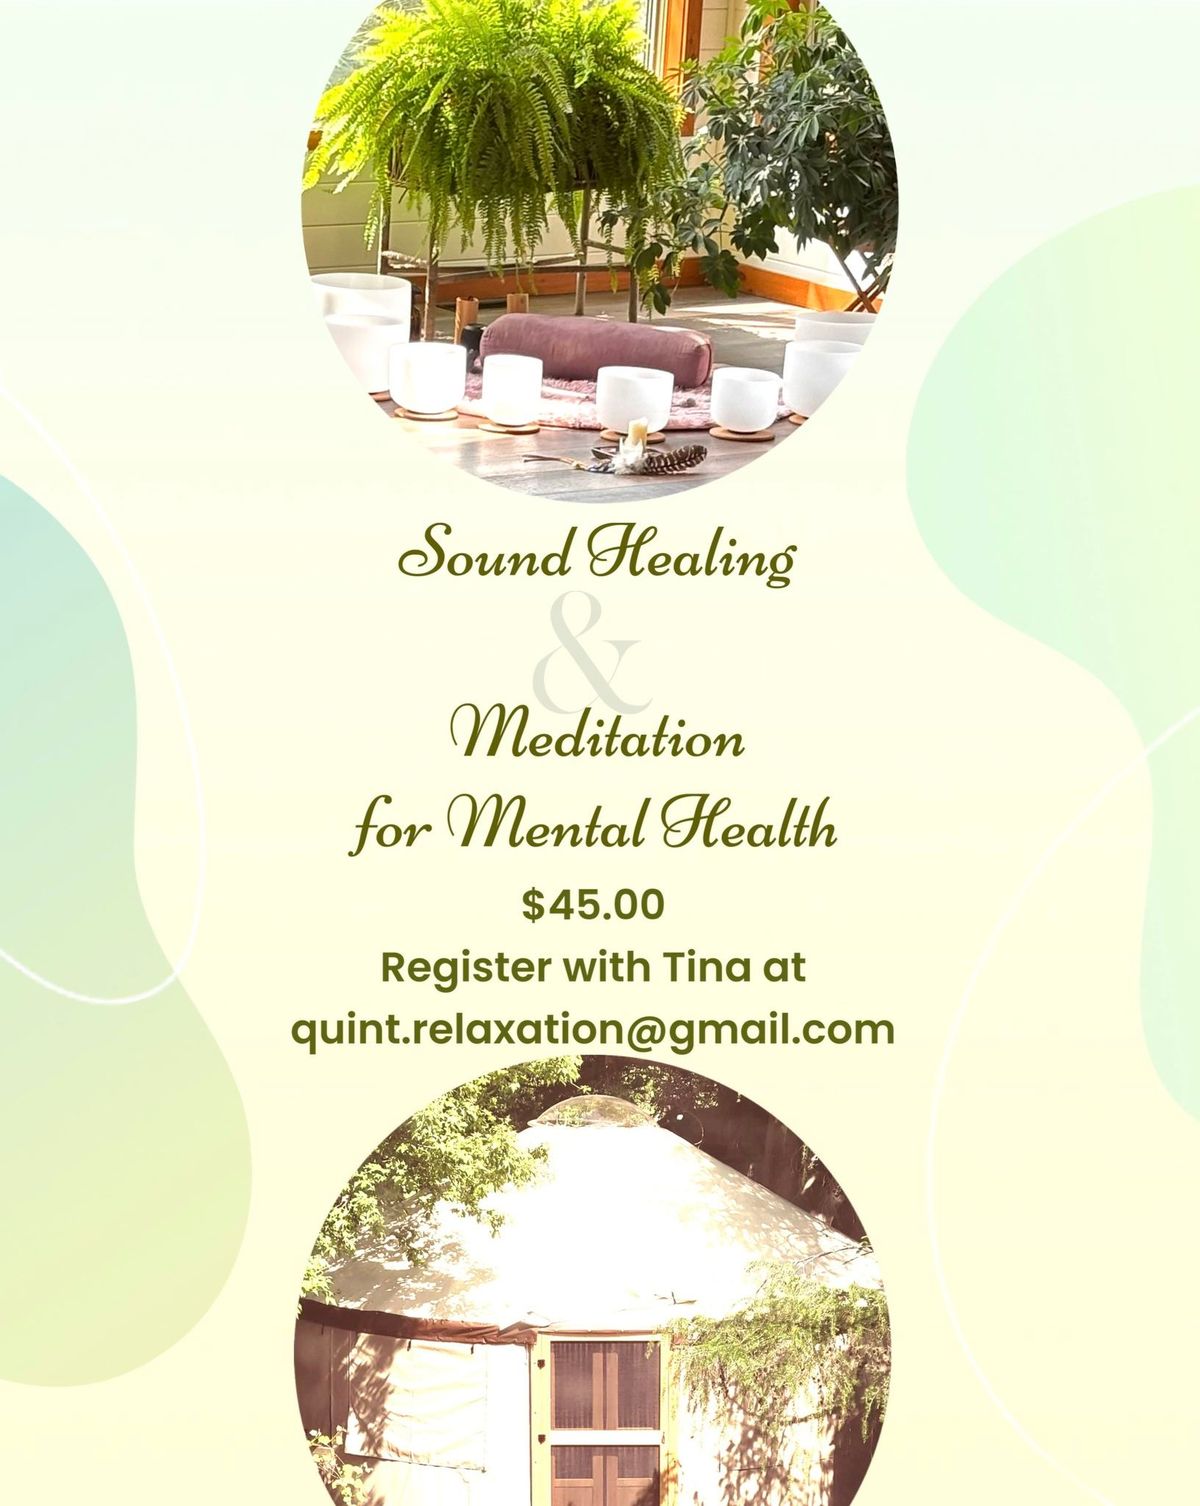 Sound healing and Meditation to Support Mental Health Month 